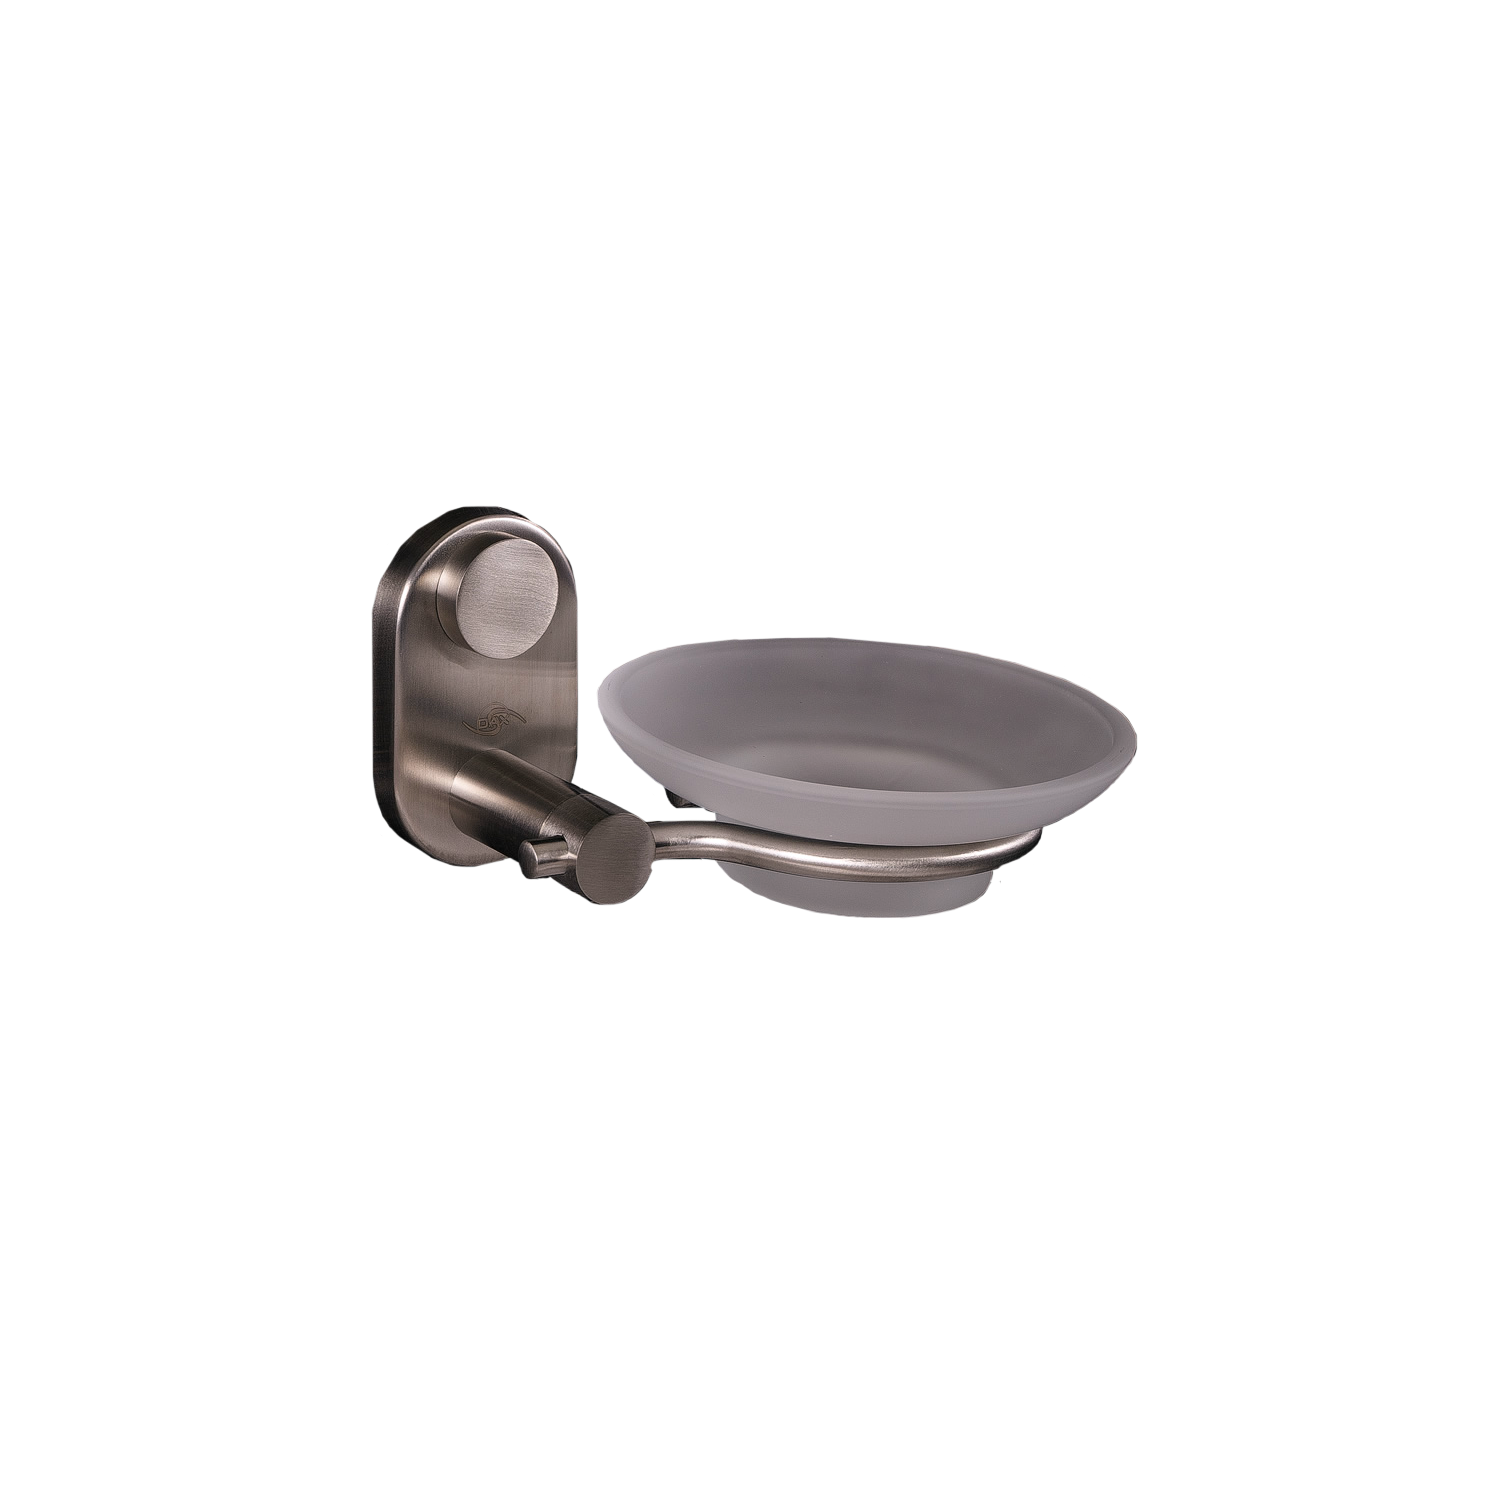 DAX Stainless Steel Soap Dish, Wall Mount with Glass Tray, Polish Finish, 2-13/16 x 5-1/2 x 4-1/2 Inches (DAX-G0205-P)